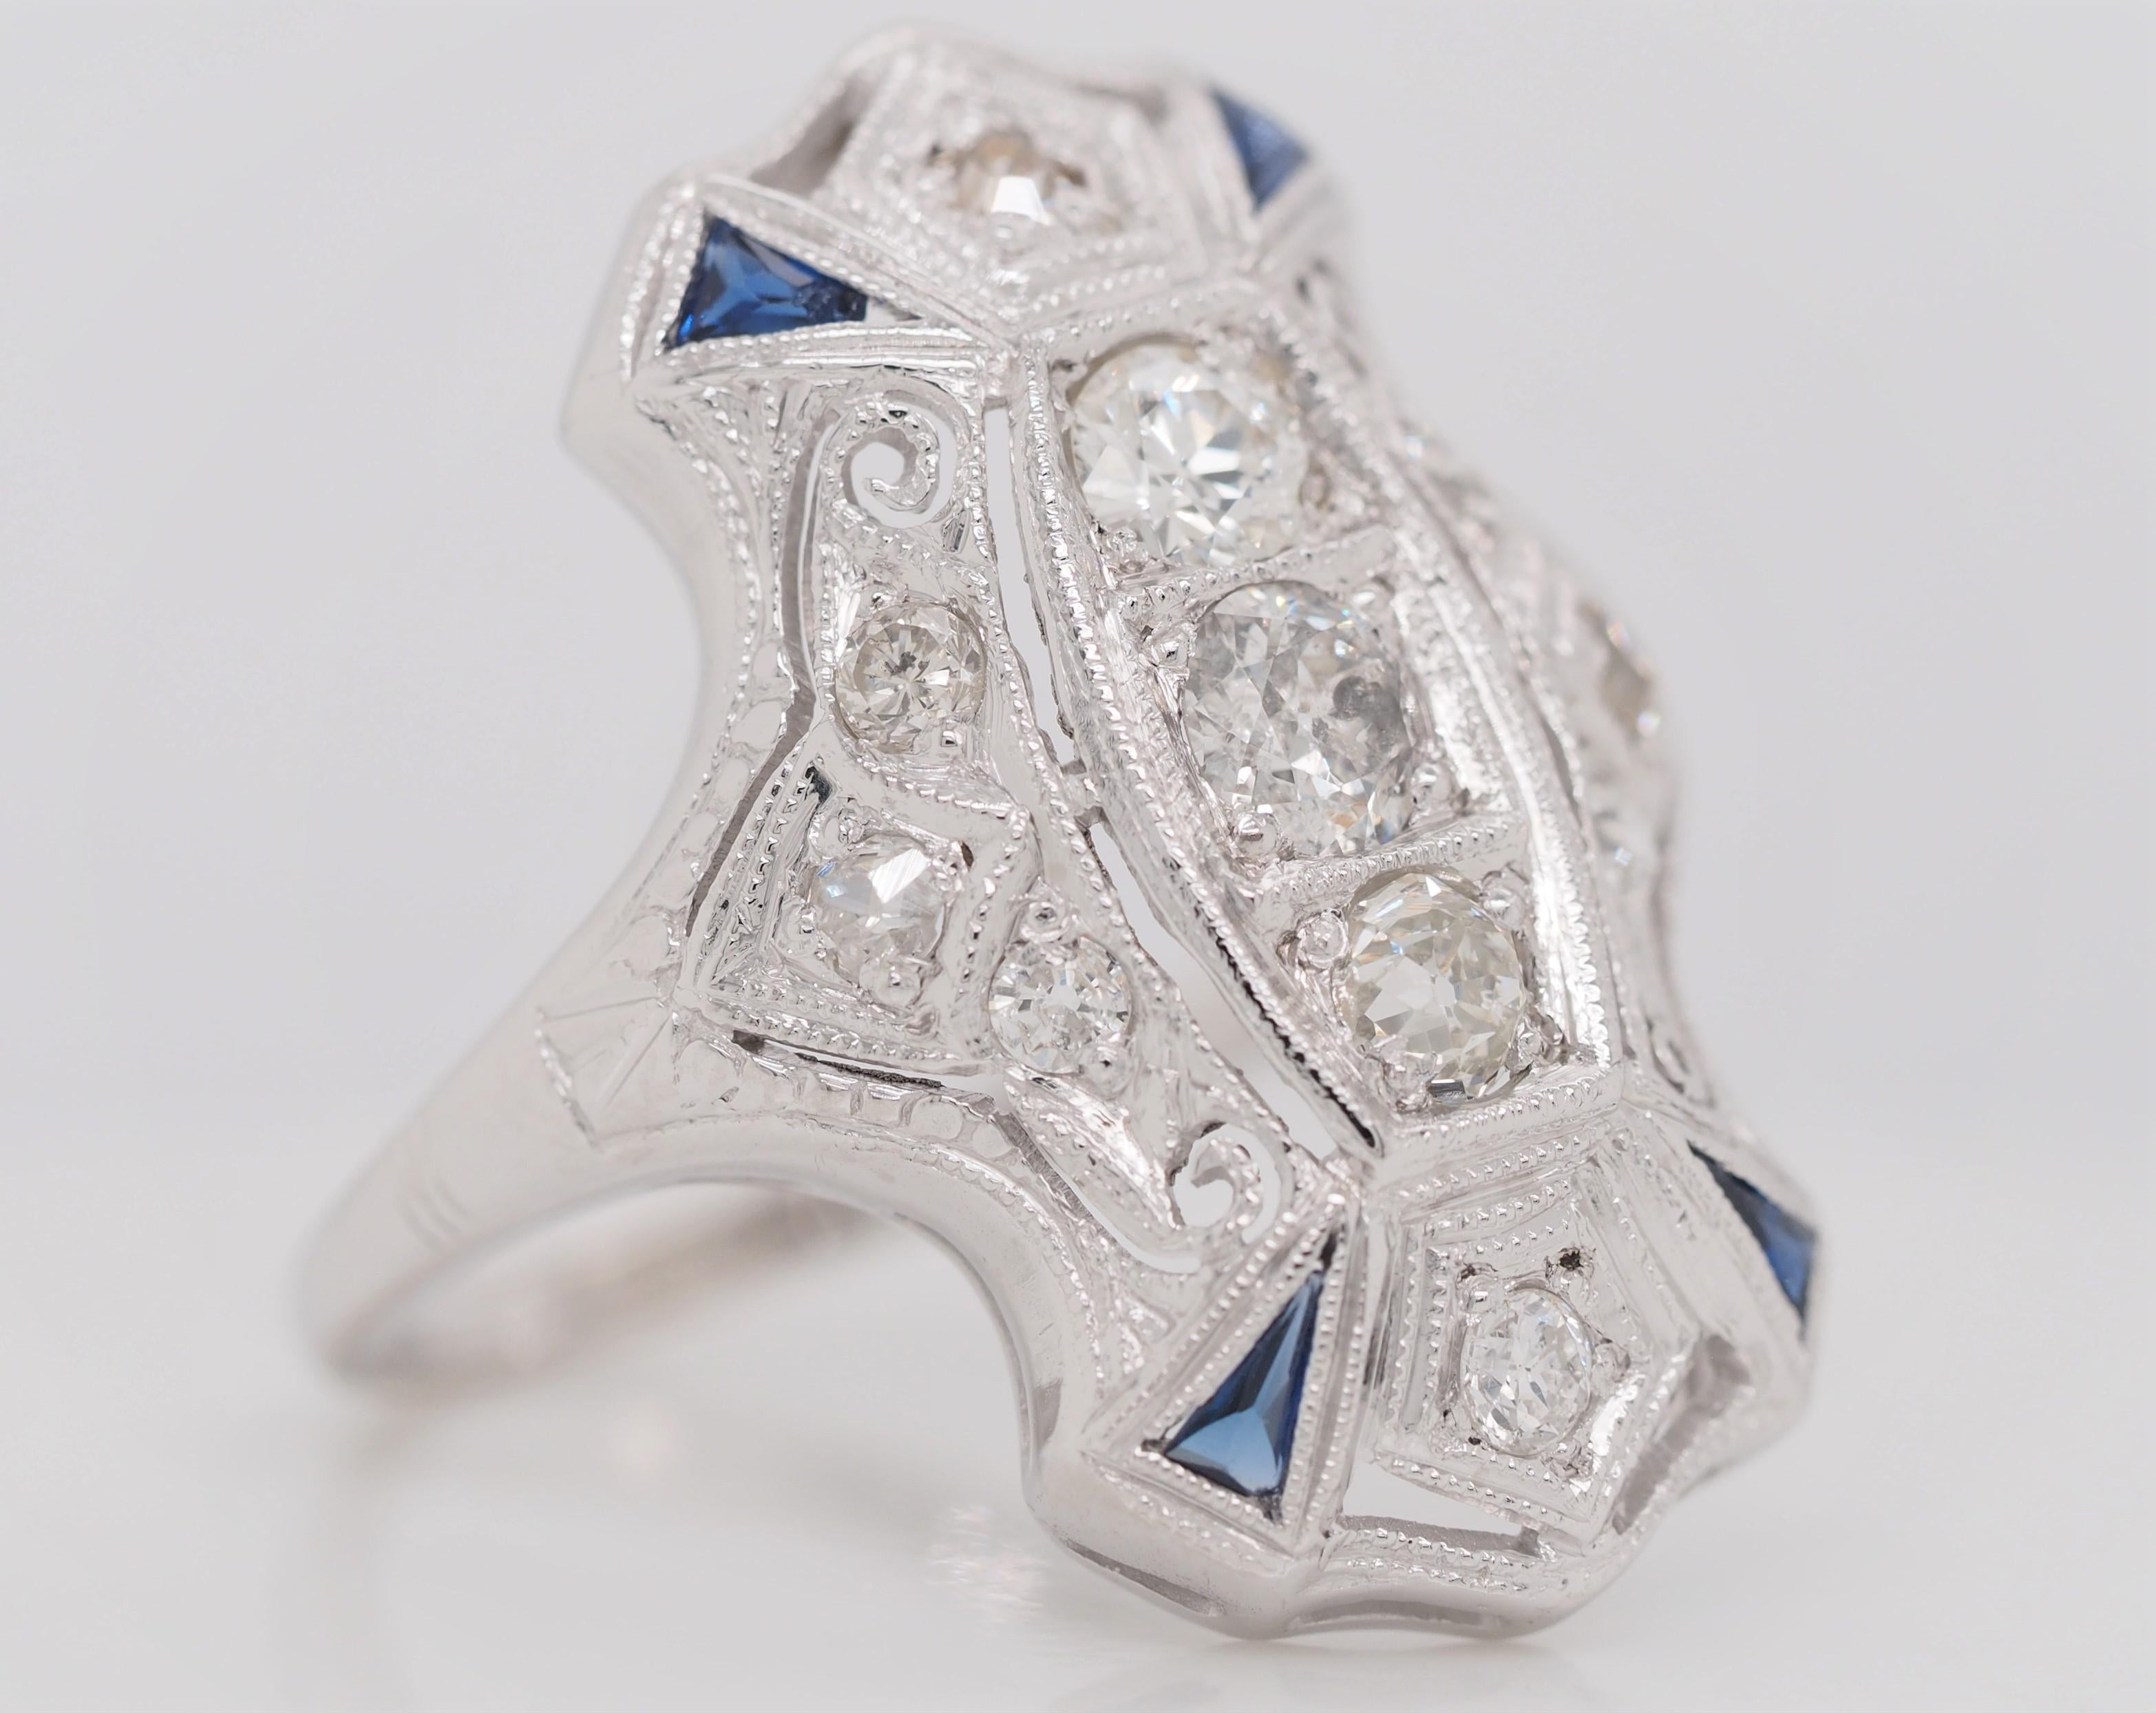 This lovely example of an Art Deco shield ring is crafted of stunning platinum. Intricate filigree designs surround 3 sparkling diamonds on this vintage beauty. Four sapphire pyramids and 8 round cut diamonds add a pop of color that adds to this